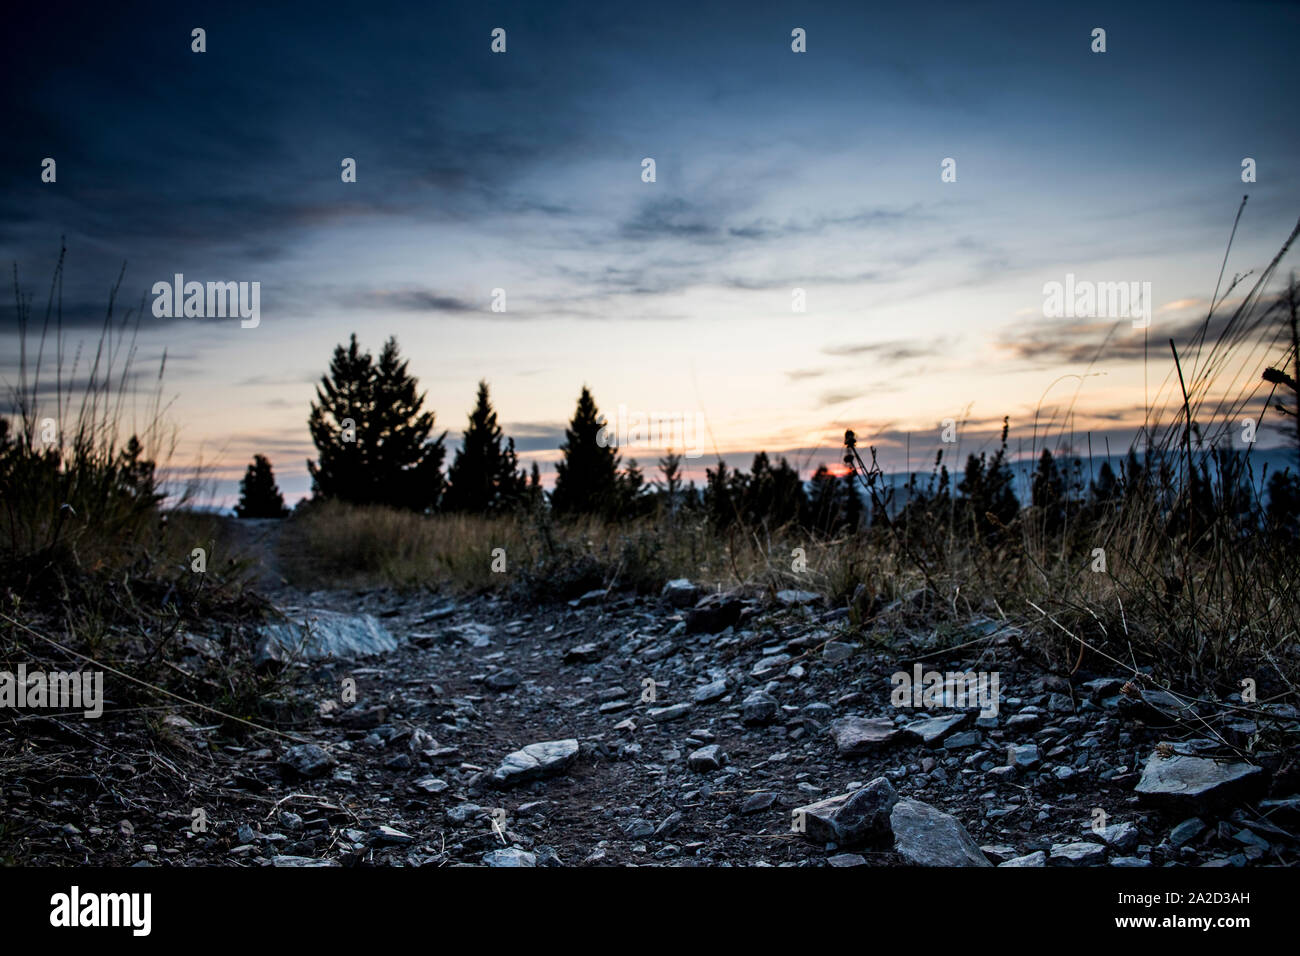 A detailed view of an empty trail at sunset near Missoula, Montana. Stock Photo